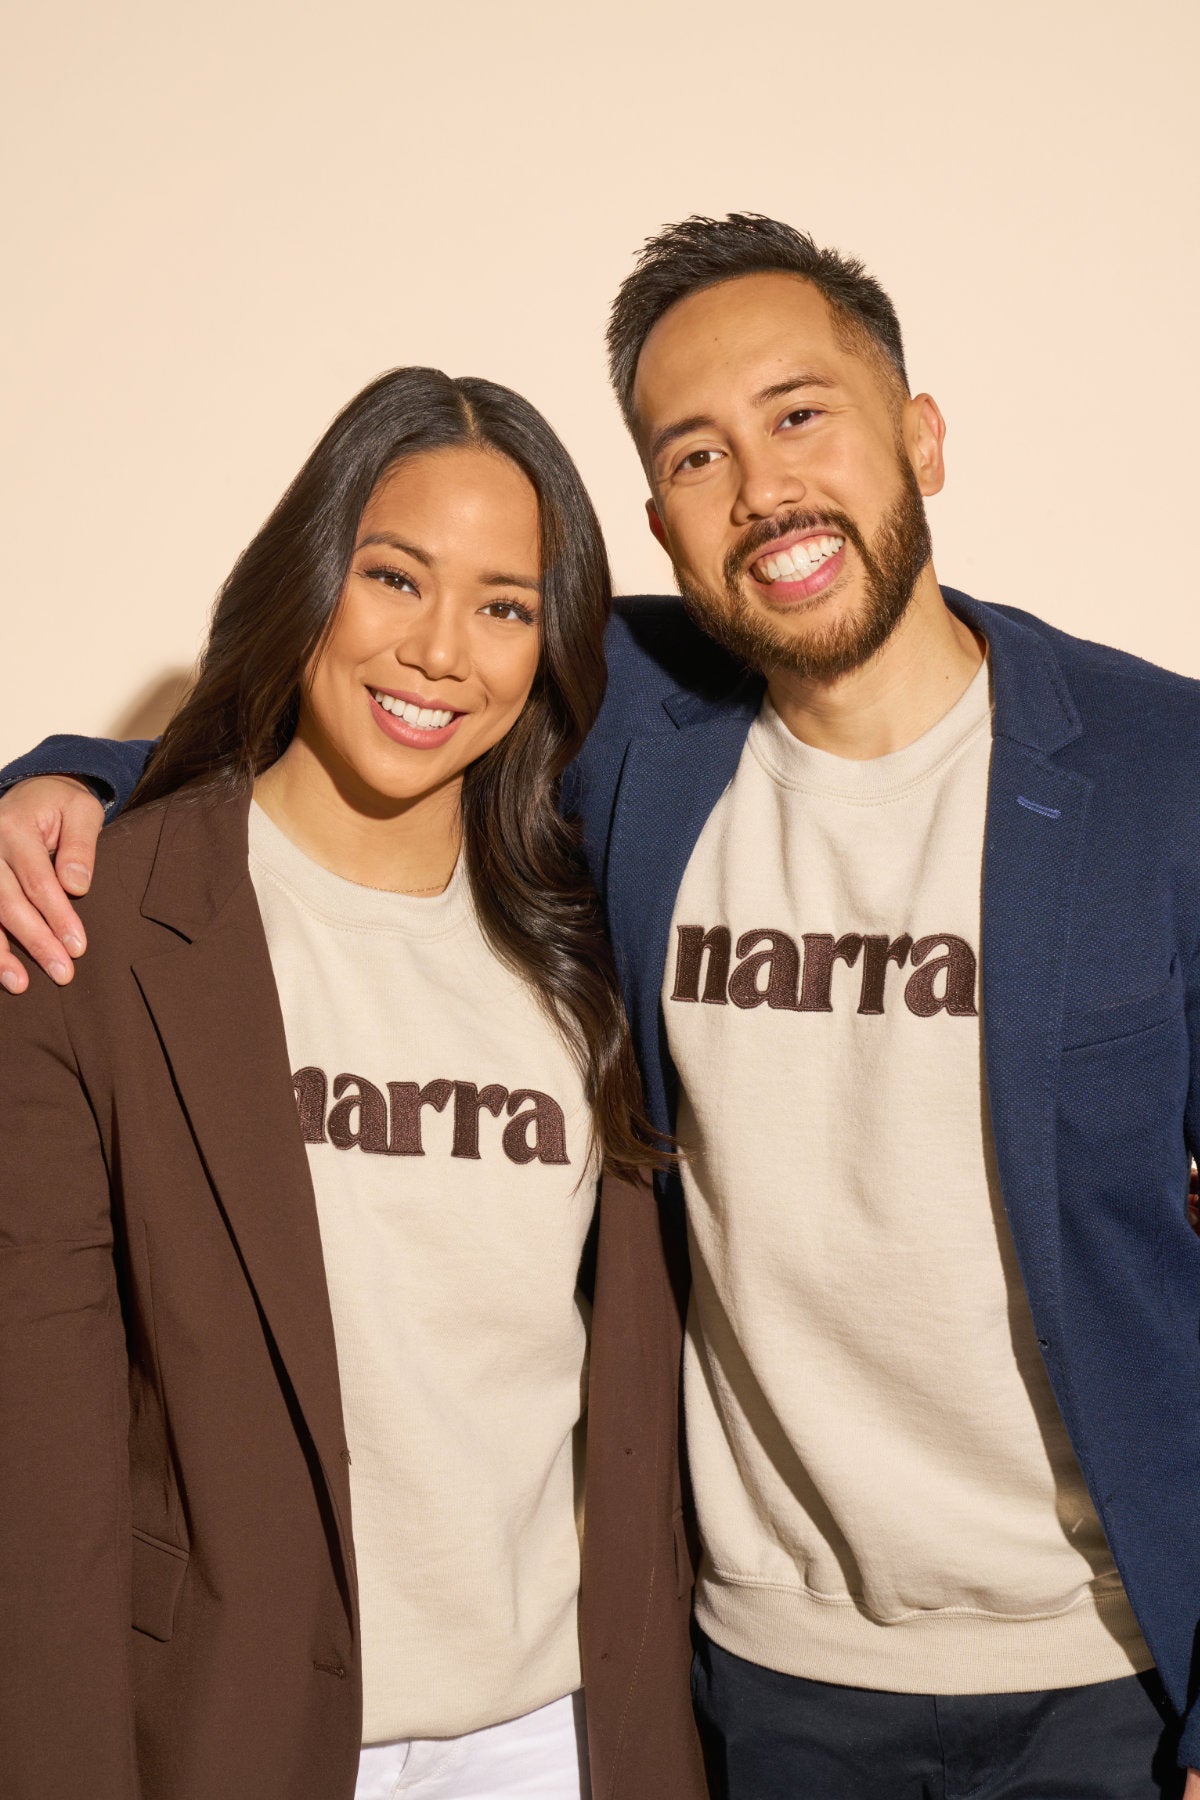 A headshot photo of Victoria and Miggy Reyes, the sibling co-founders of Narra, wearing Narra branded sweaters.